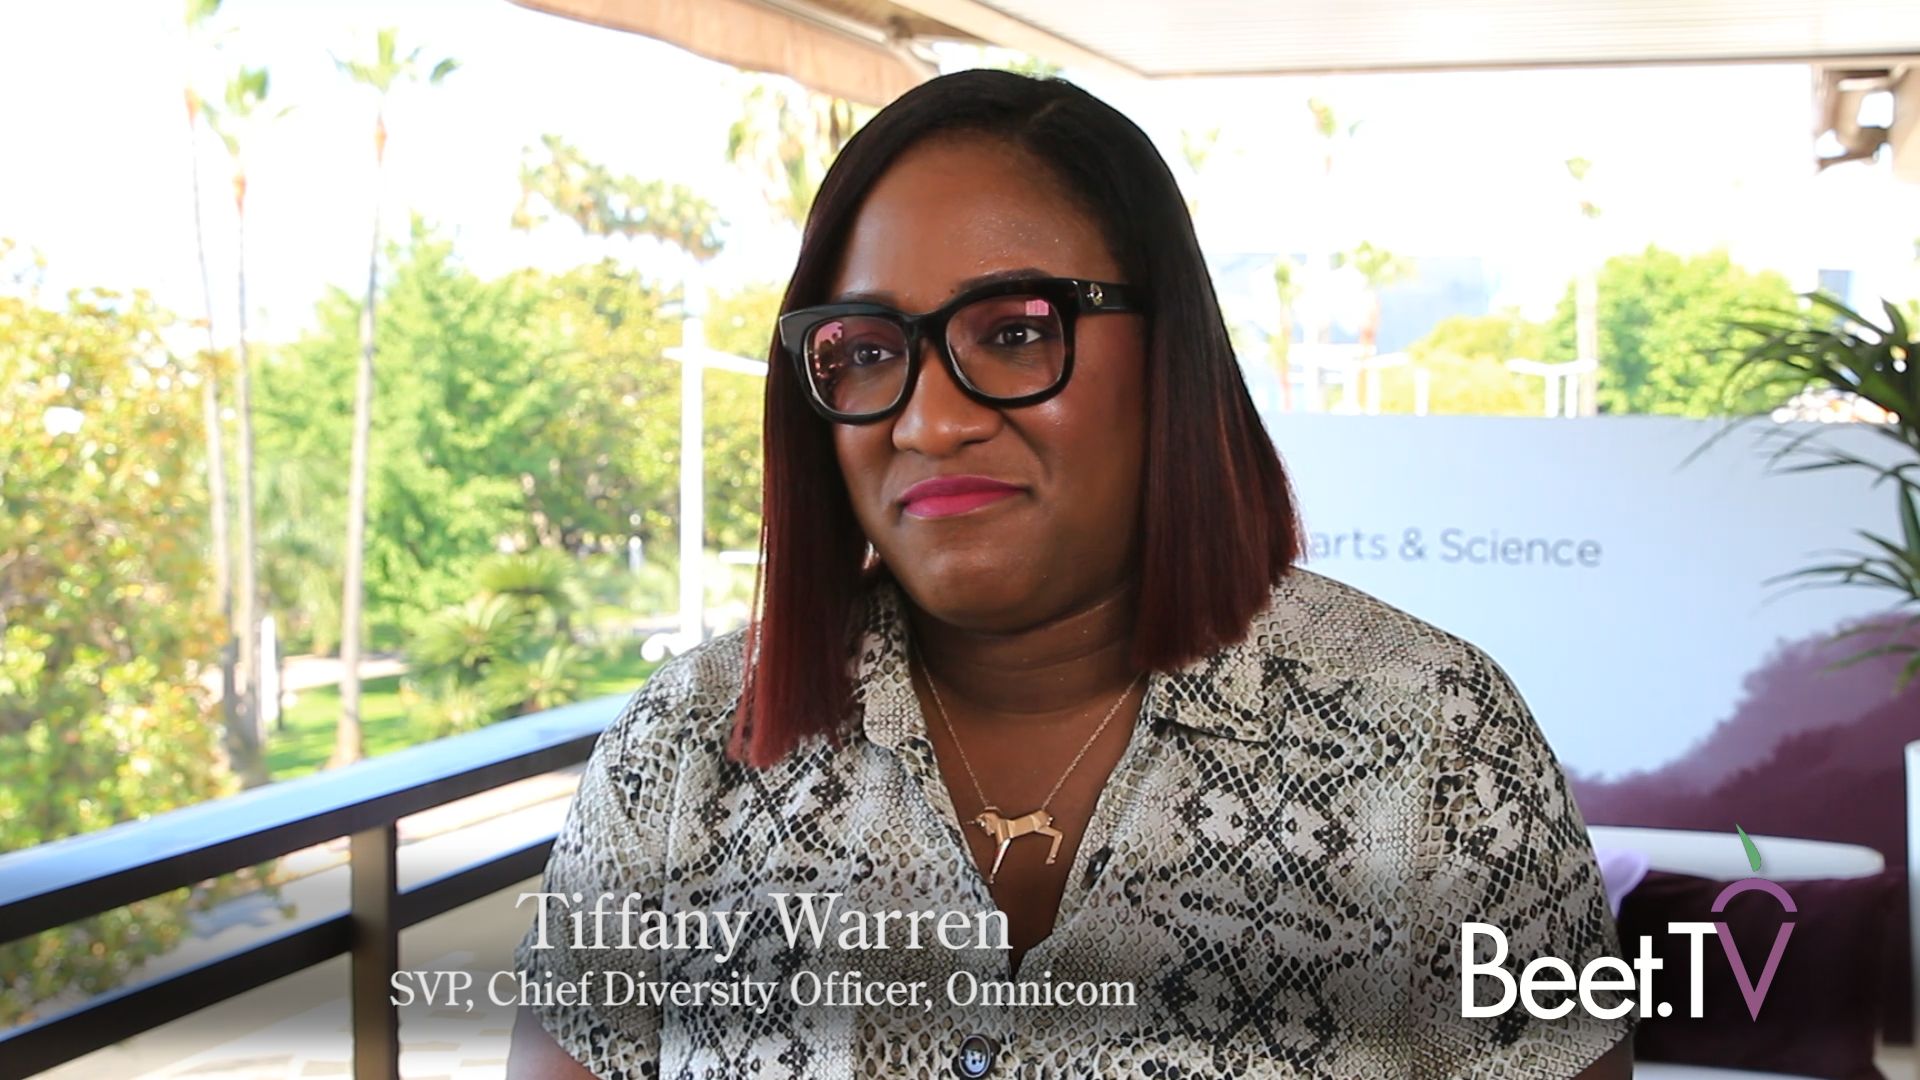 With Progress On Diversity And Inclusion, Worker Retention Now Crucial: Omnicom’s Warren